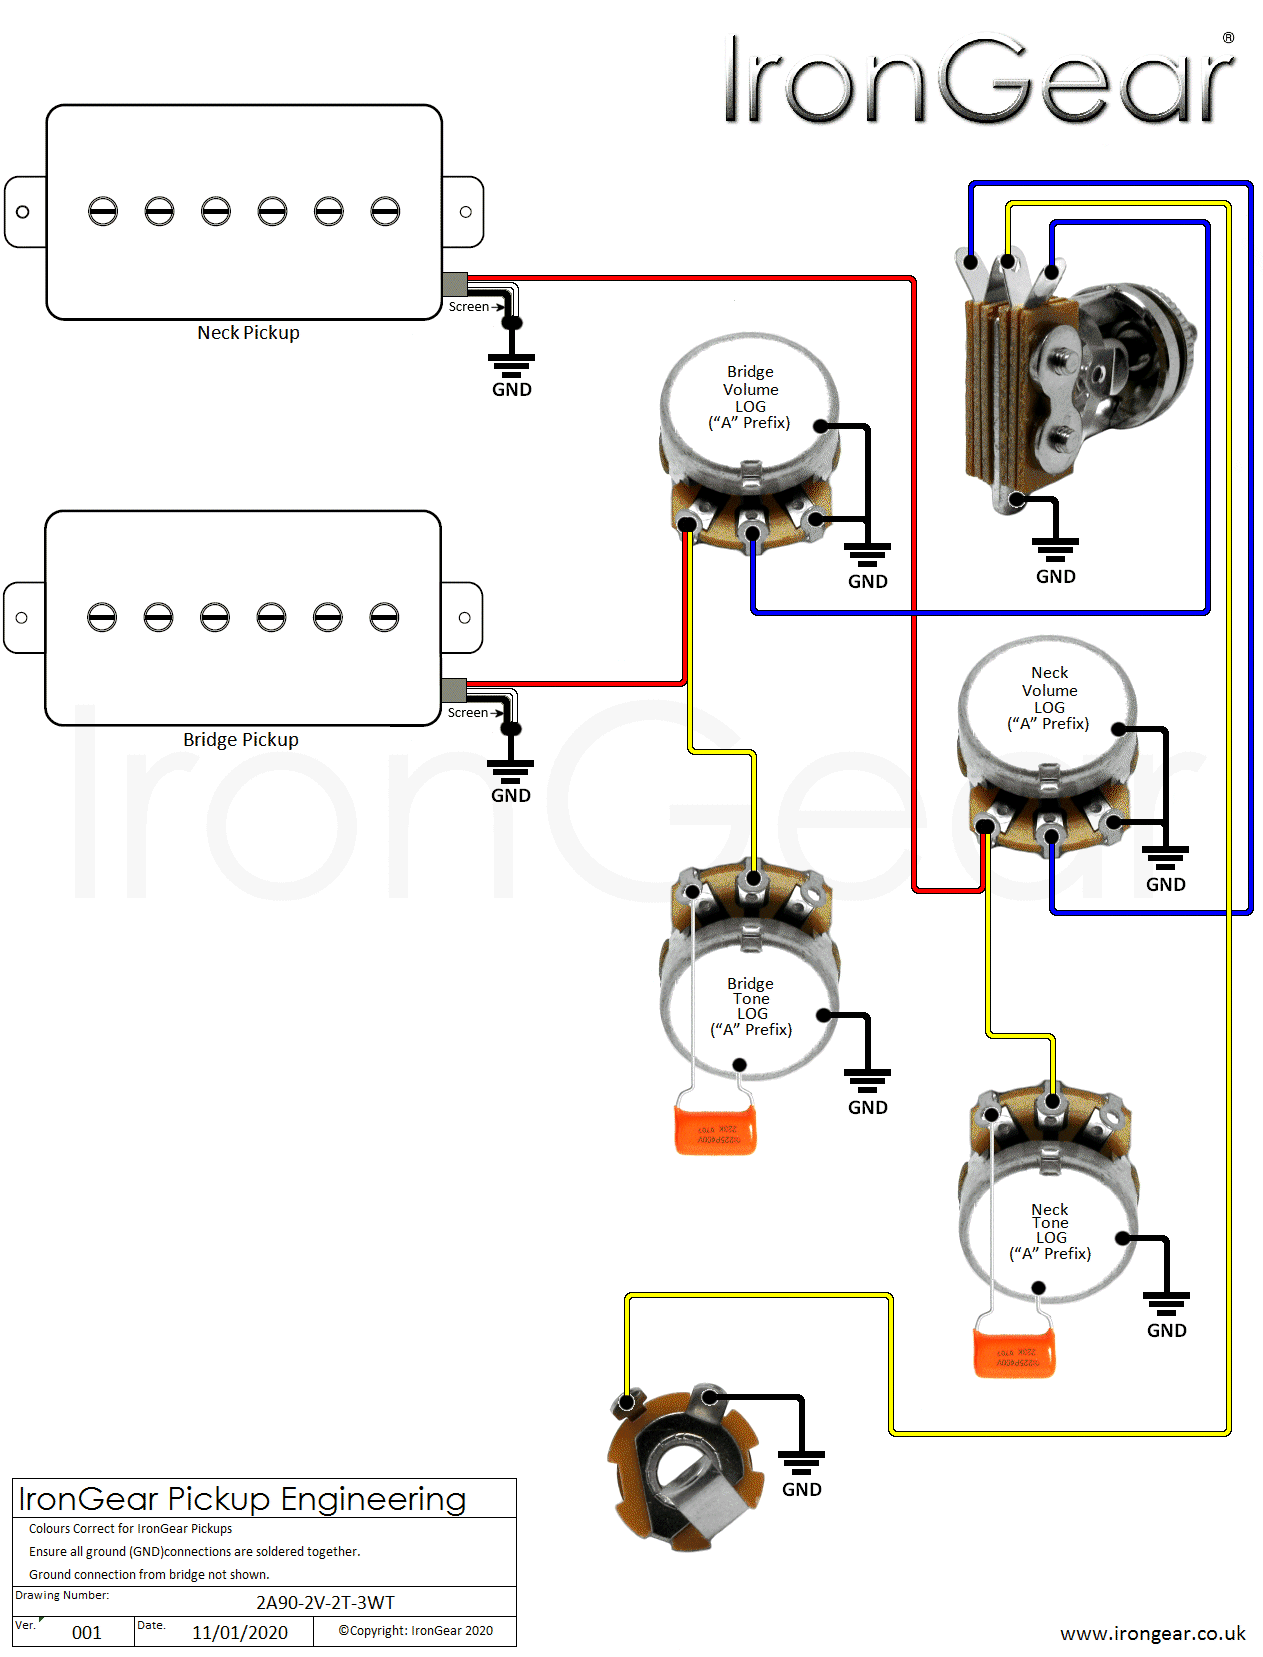 Wiring Diagram For Guitar Three Way Switch from www.irongear.co.uk